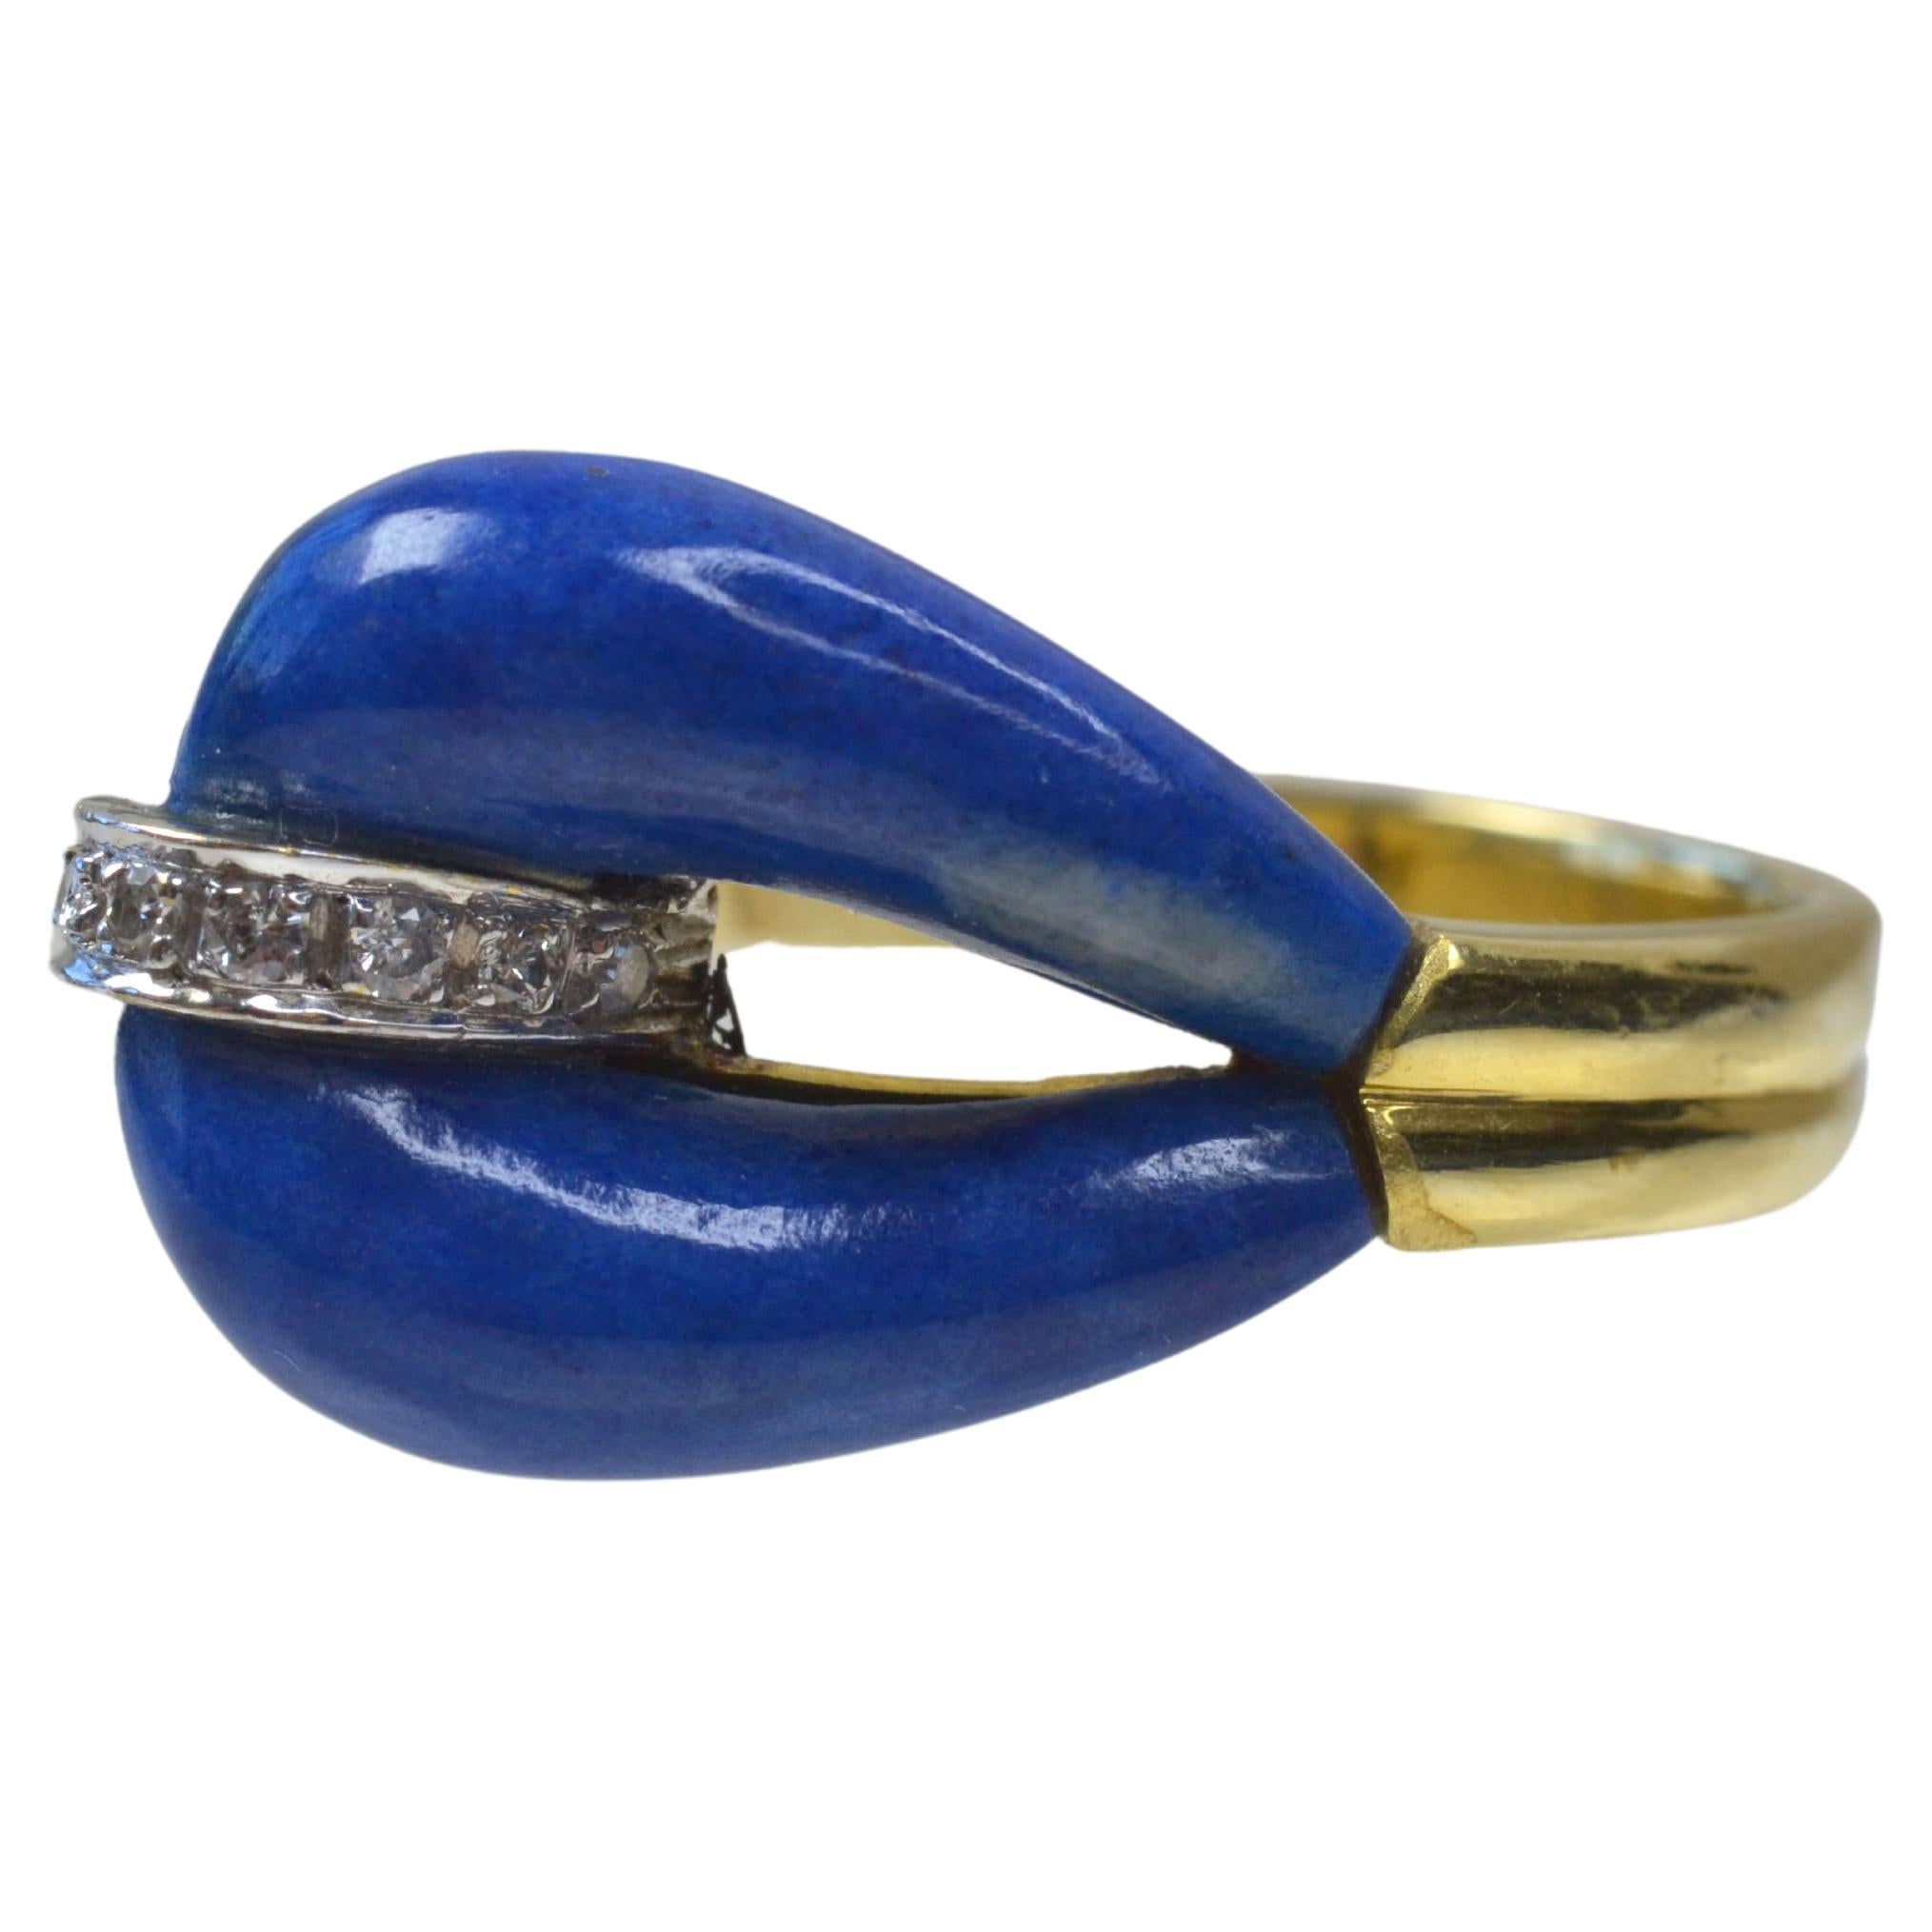 Vintage 14k Gold Lapis Lazuli Teardrop Ring with Diamonds, One-of-a-kind